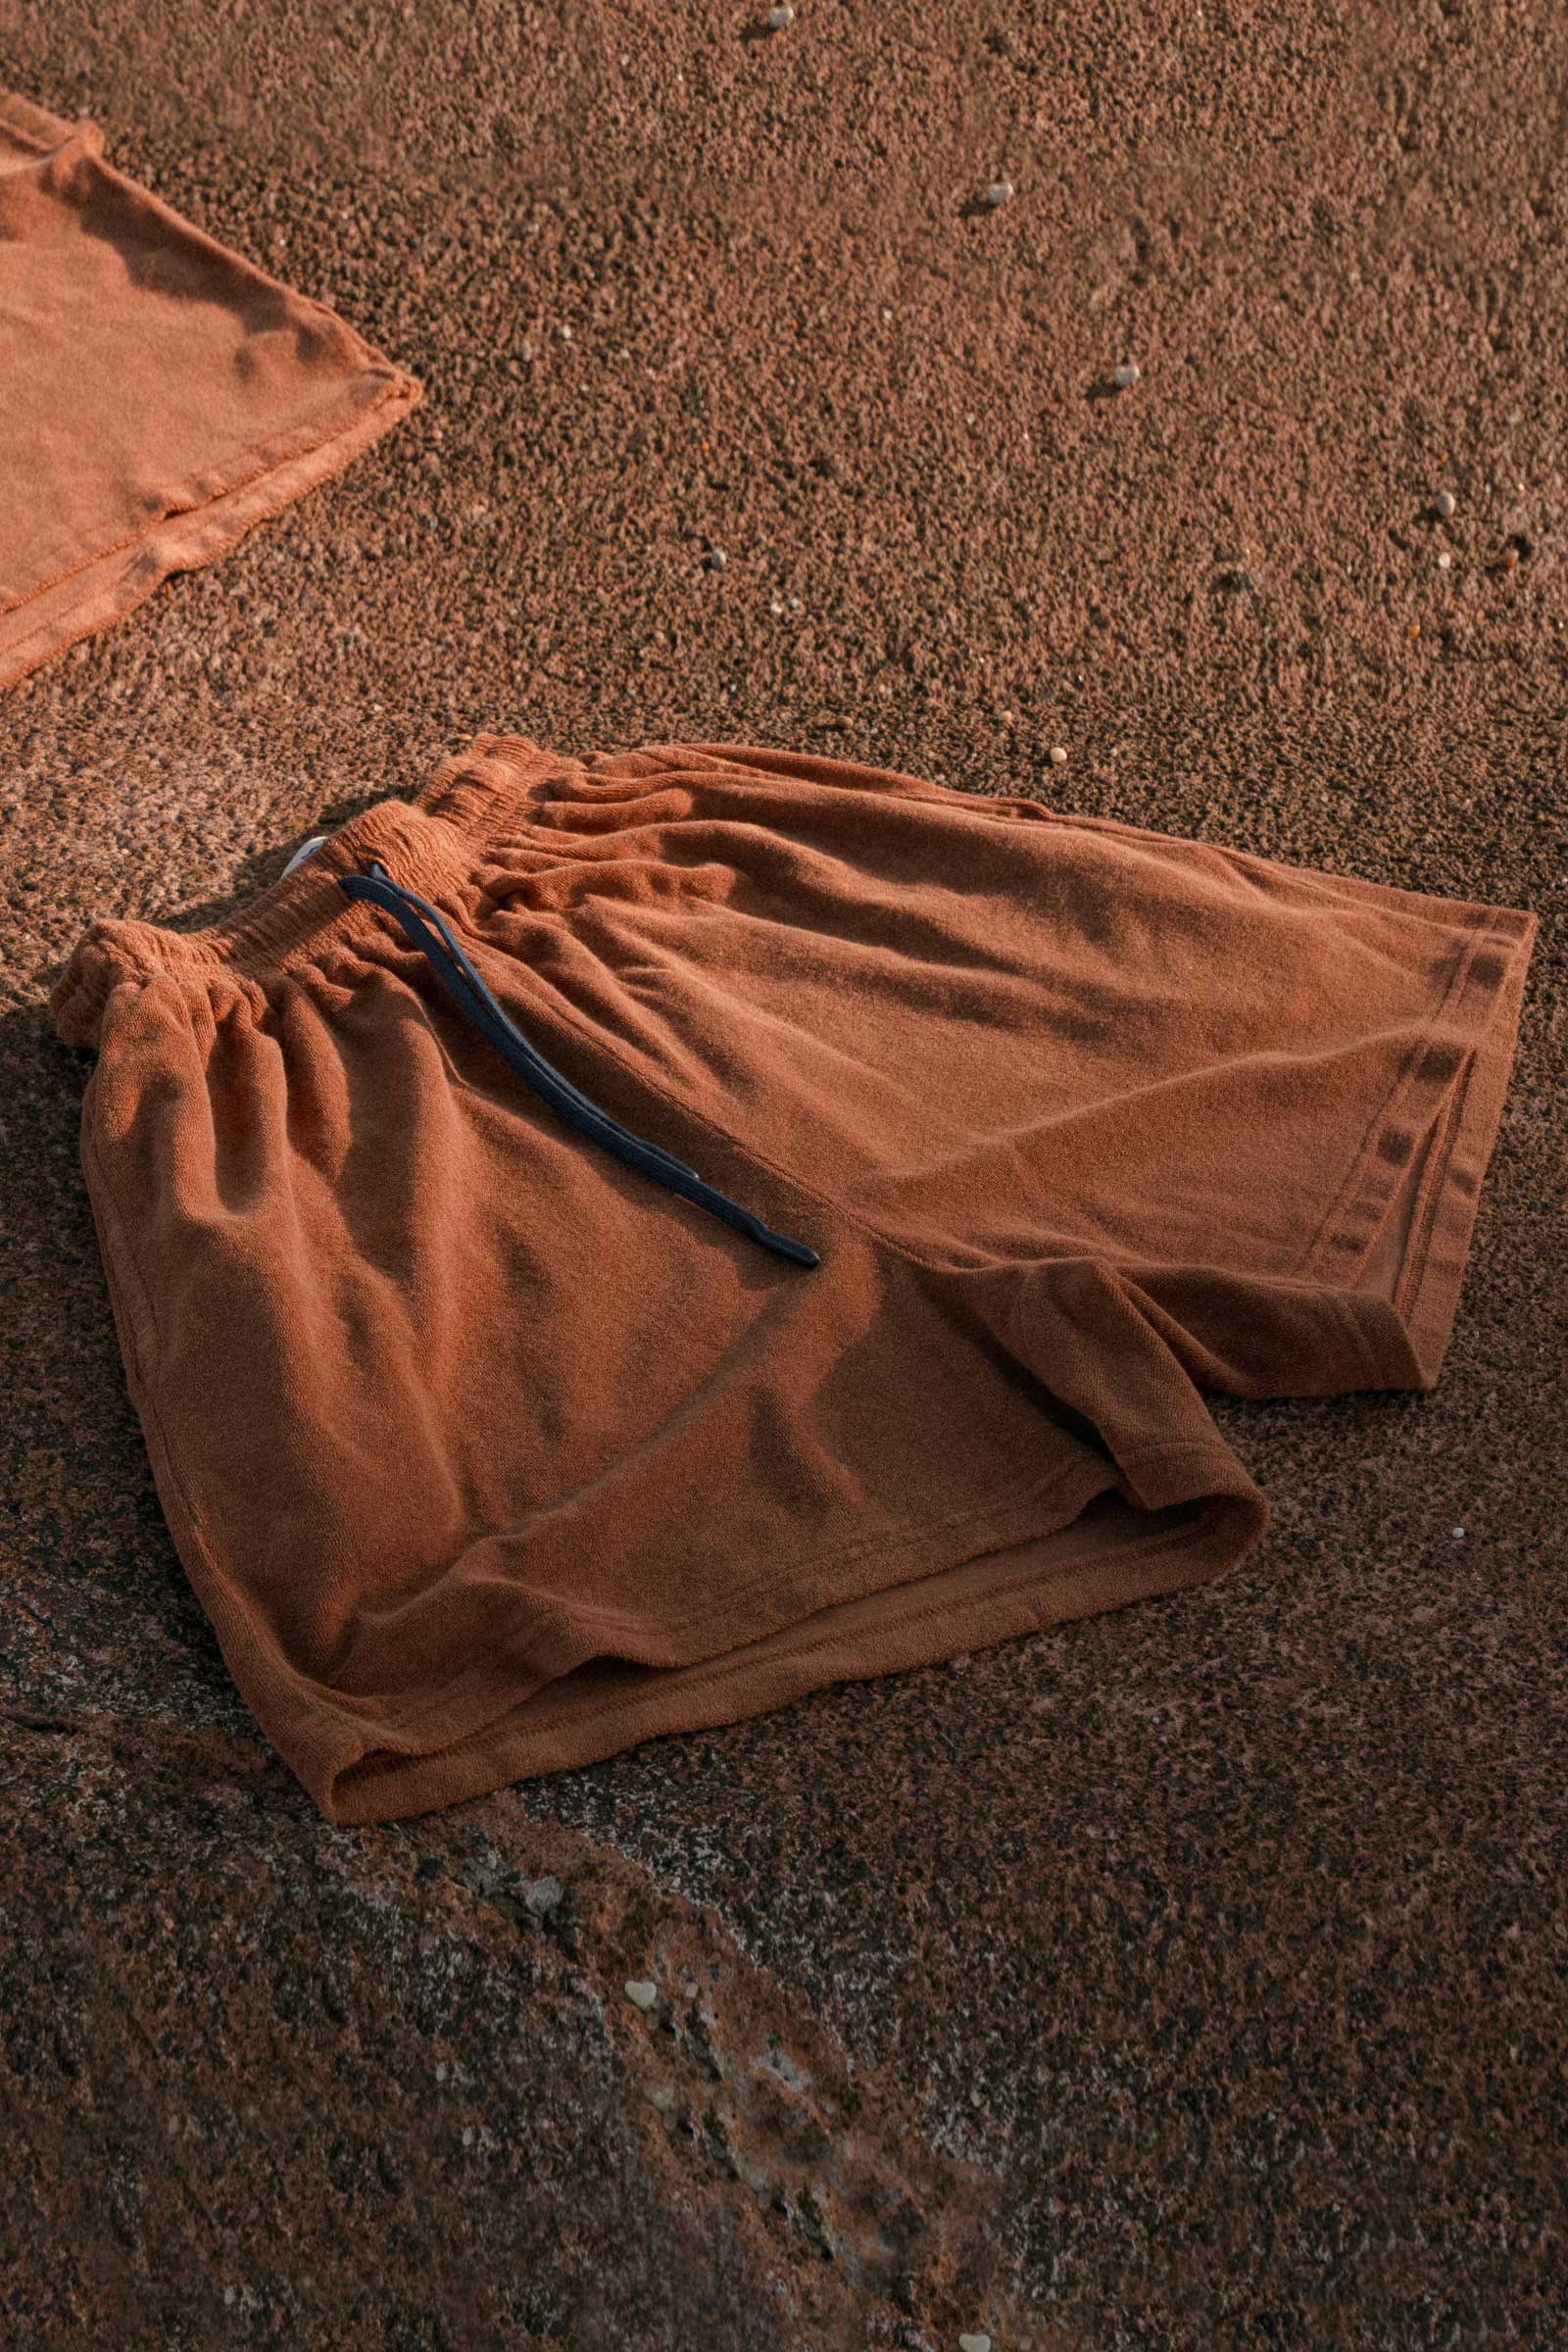 10 to 10 Cotton shorts in ginger colour with blue cord